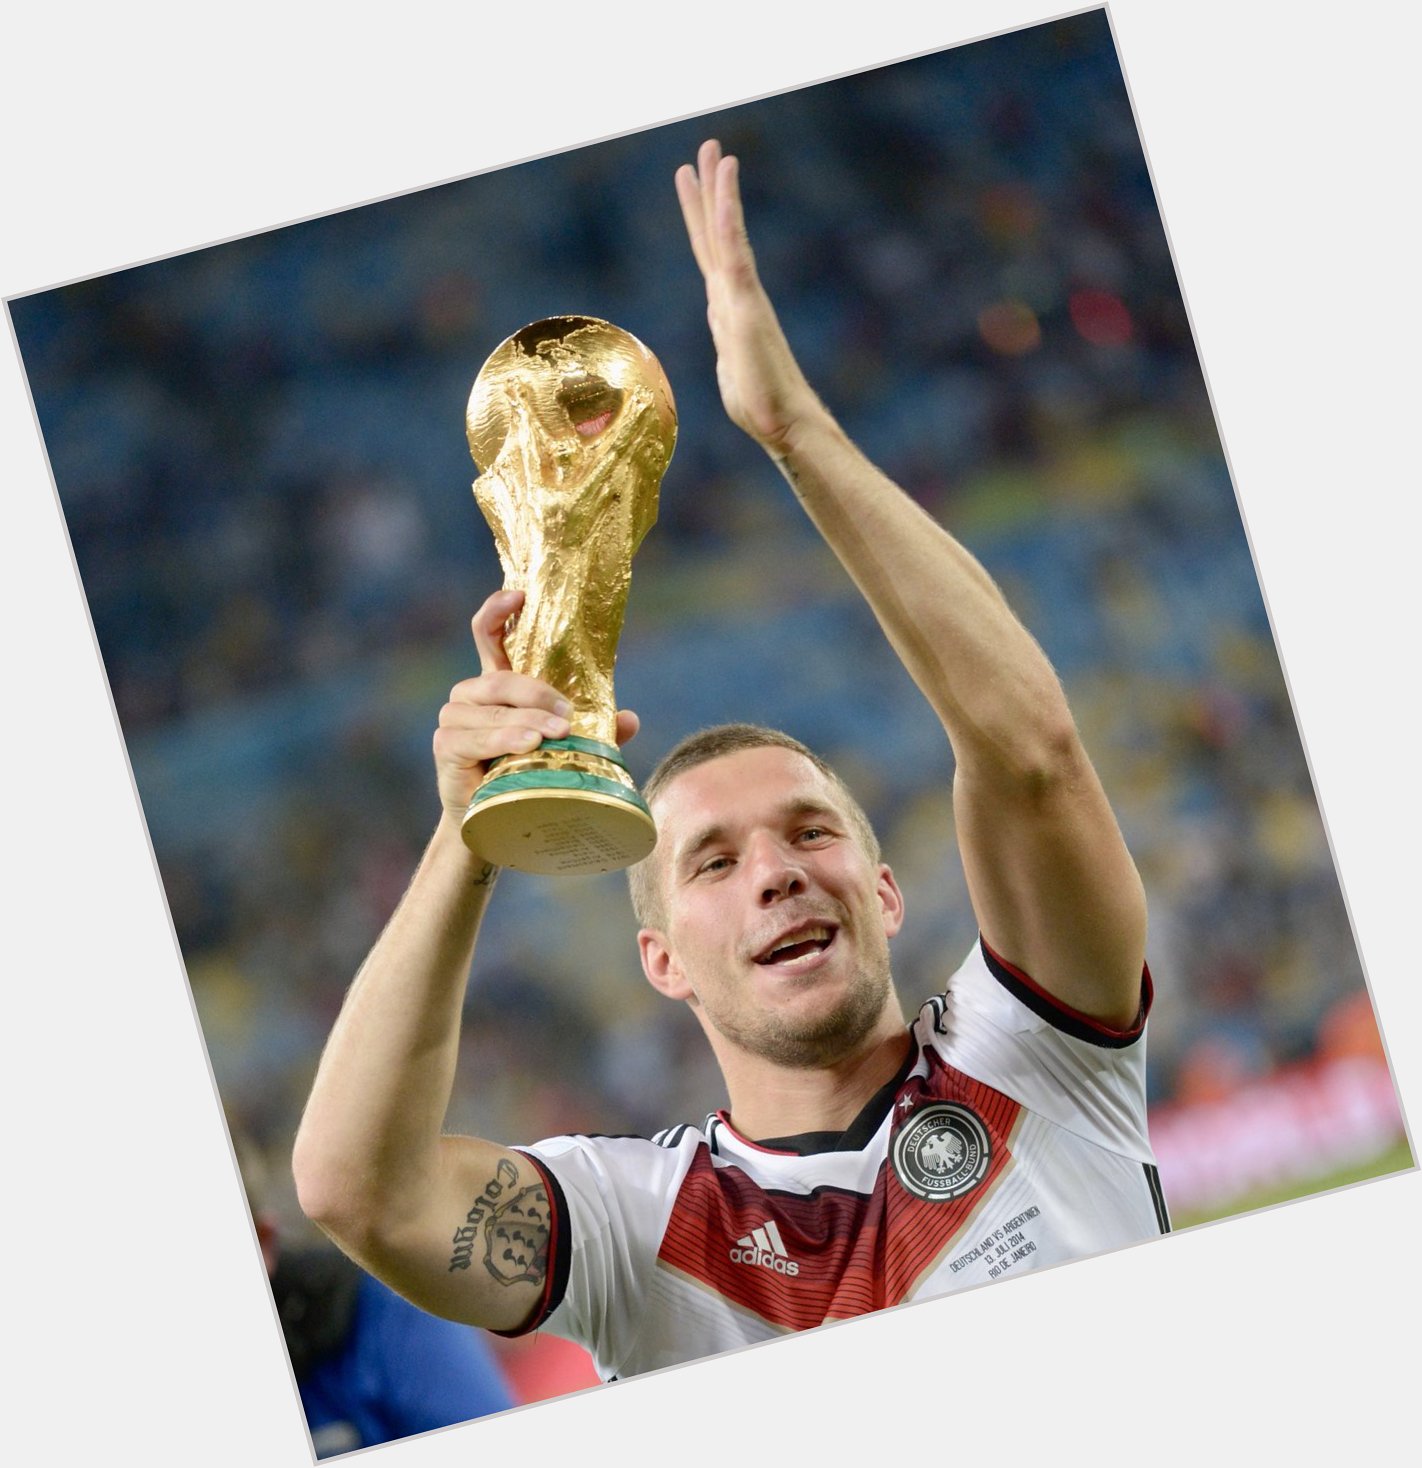 Happy birthday to the 2006 World Cups Best Young Player, Lukas Podolski  : Bob Thomas/Popperfoto (Getty Images) 